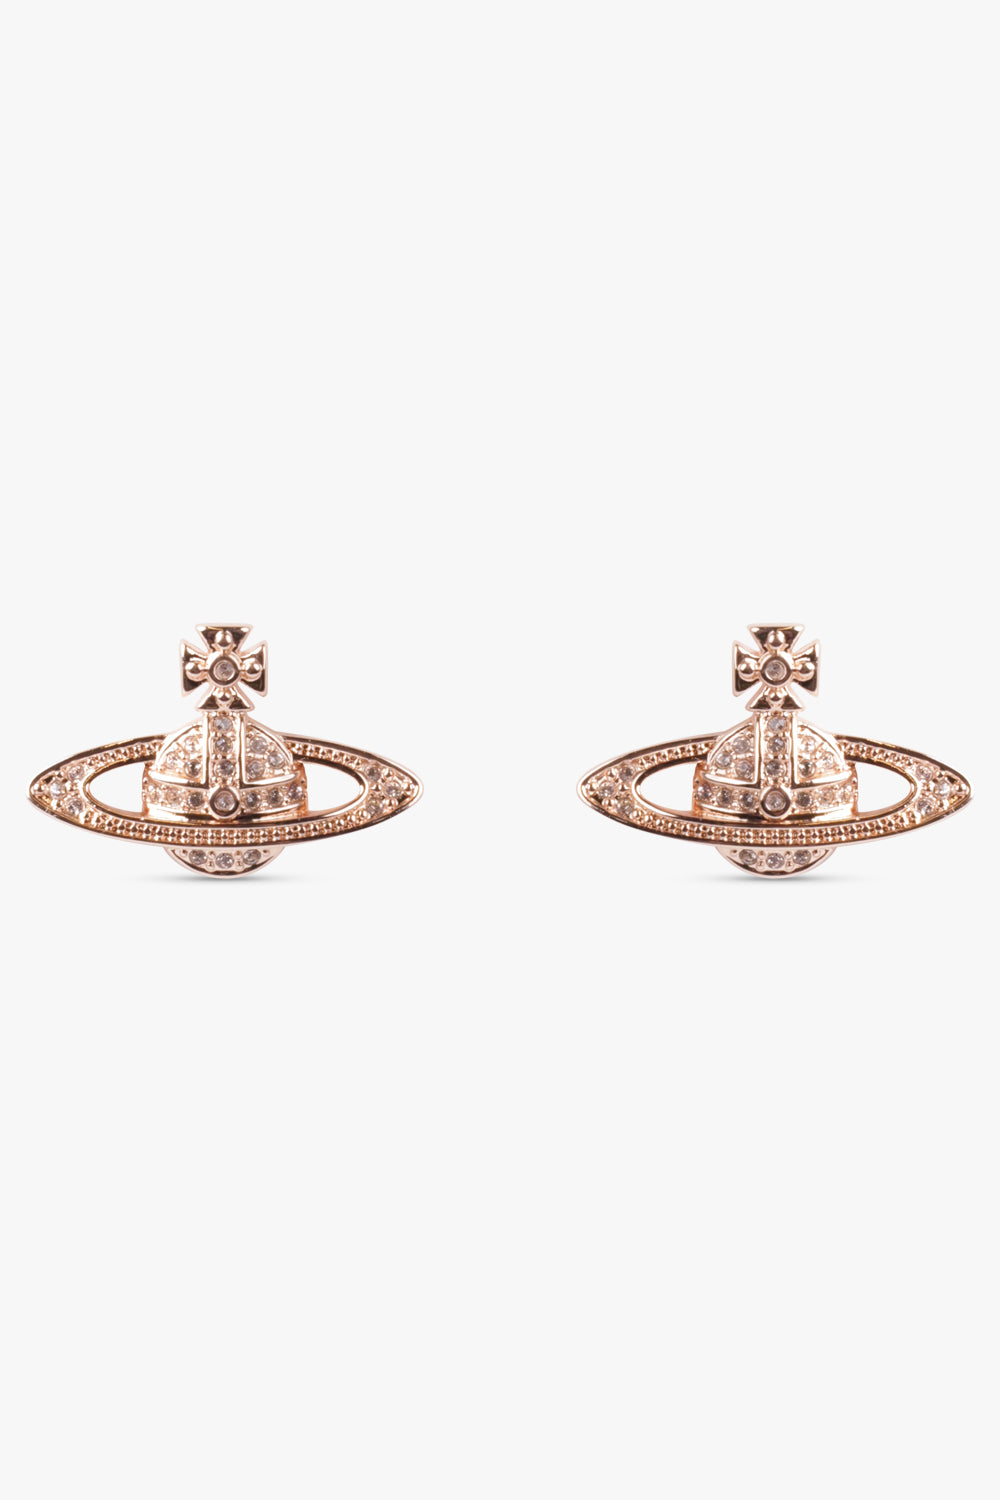 VIVIENNE WESTWOOD JEWELLRY PINK / PINK MINI BAS RELIEF EARRINGS | ROSE GOLD